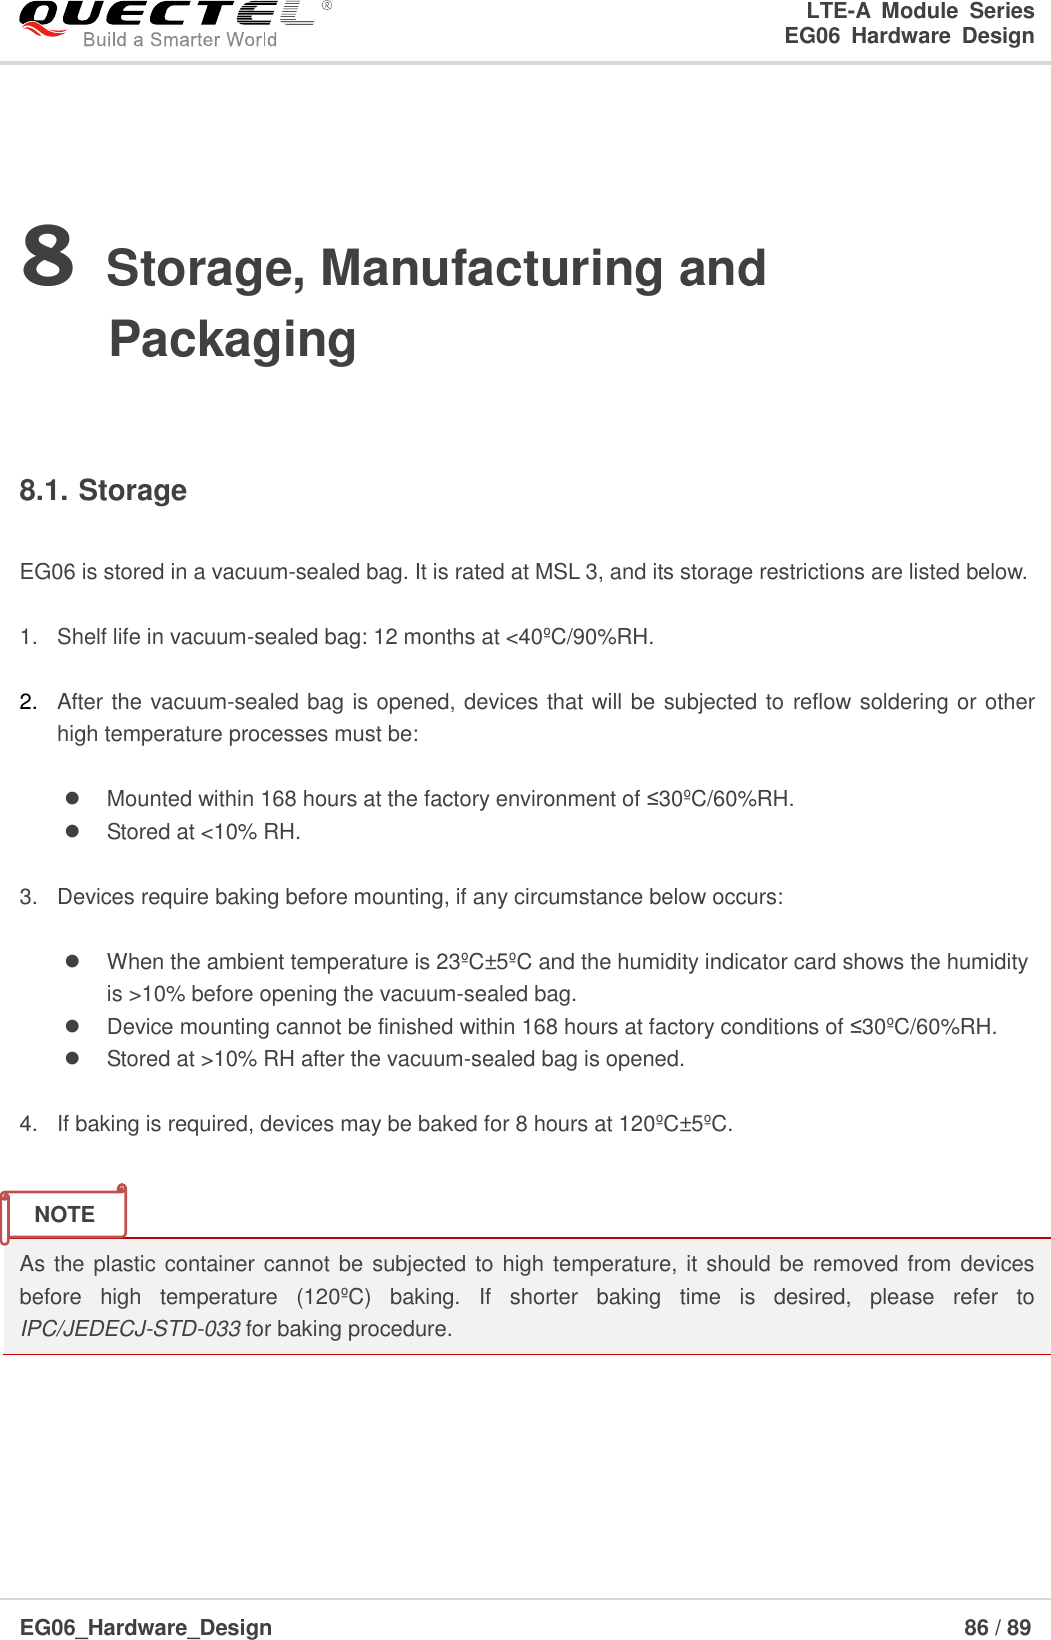 LTE-A  Module  Series                                                  EG06  Hardware  Design  EG06_Hardware_Design                                                               86 / 89    8 Storage, Manufacturing and Packaging  8.1. Storage  EG06 is stored in a vacuum-sealed bag. It is rated at MSL 3, and its storage restrictions are listed below.    1.  Shelf life in vacuum-sealed bag: 12 months at &lt;40ºC/90%RH.    2. After the vacuum-sealed bag is opened, devices that will be subjected to reflow soldering or other high temperature processes must be:    Mounted within 168 hours at the factory environment of ≤30ºC/60%RH.   Stored at &lt;10% RH.  3.  Devices require baking before mounting, if any circumstance below occurs:    When the ambient temperature is 23ºC±5ºC and the humidity indicator card shows the humidity        is &gt;10% before opening the vacuum-sealed bag.   Device mounting cannot be finished within 168 hours at factory conditions of ≤30ºC/60%RH.   Stored at &gt;10% RH after the vacuum-sealed bag is opened.  4.  If baking is required, devices may be baked for 8 hours at 120ºC±5ºC.   As the plastic container cannot be  subjected to high temperature, it should be removed from devices before  high  temperature  (120ºC)  baking.  If  shorter  baking  time  is  desired,  please  refer  to IPC/JEDECJ-STD-033 for baking procedure.      NOTE 